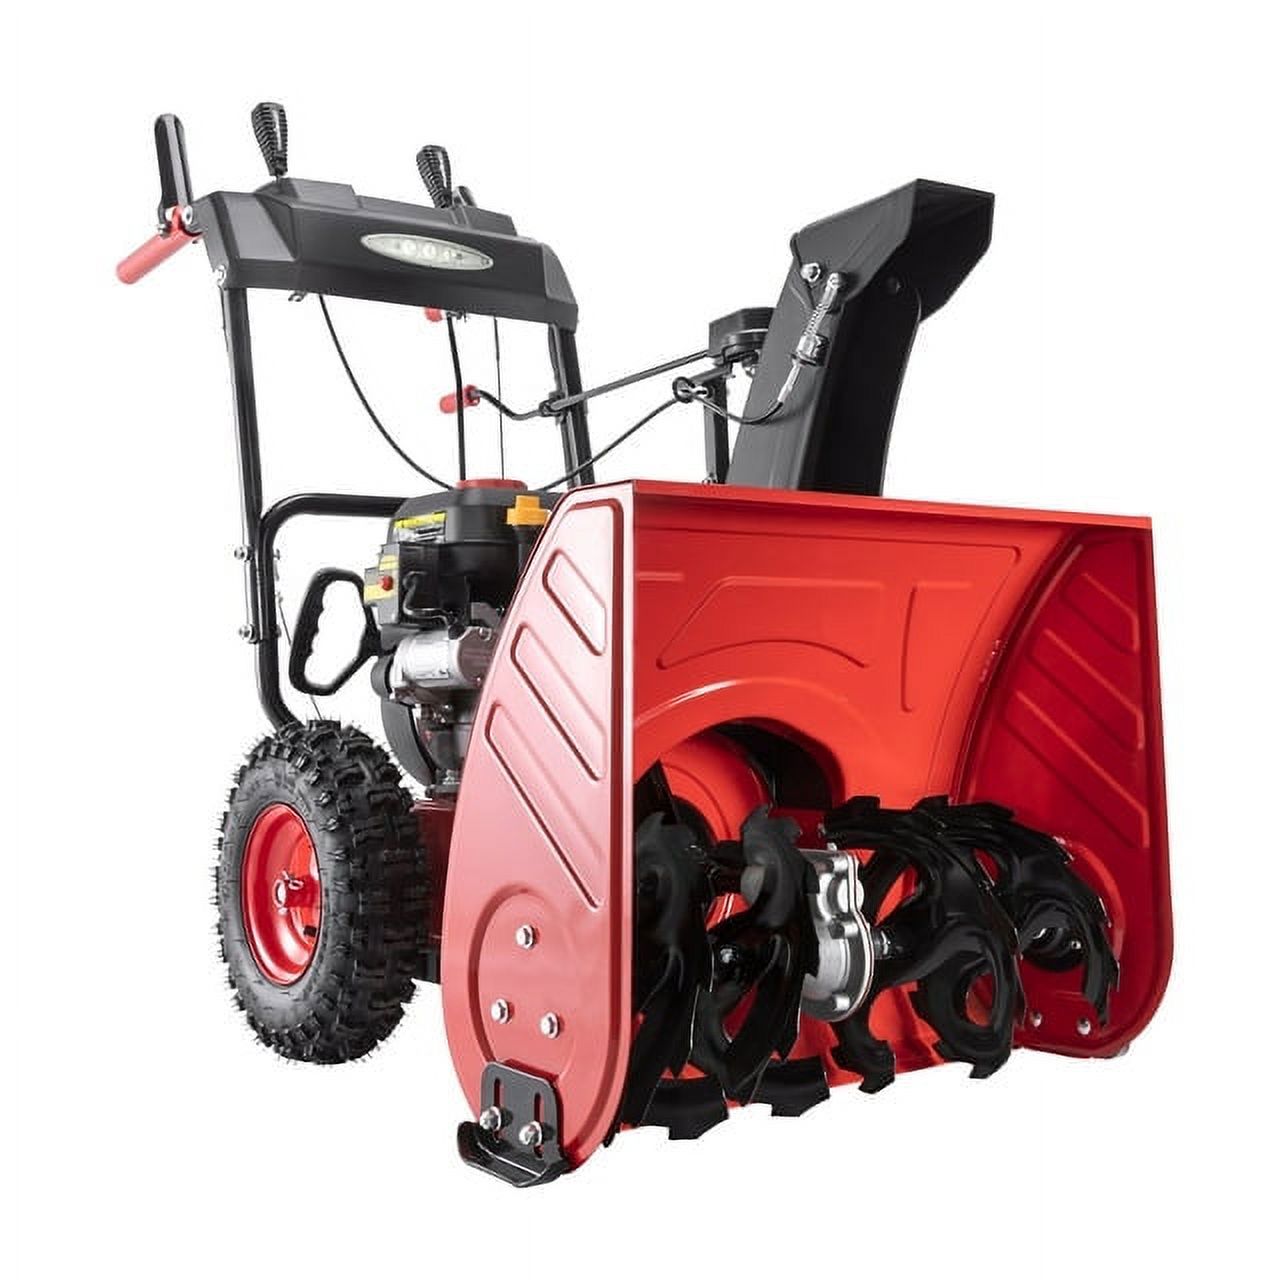 PowerSmart 26 in. Two-Stage Electric Start 252CC Self Propelled Gas Snow Blower - image 1 of 5